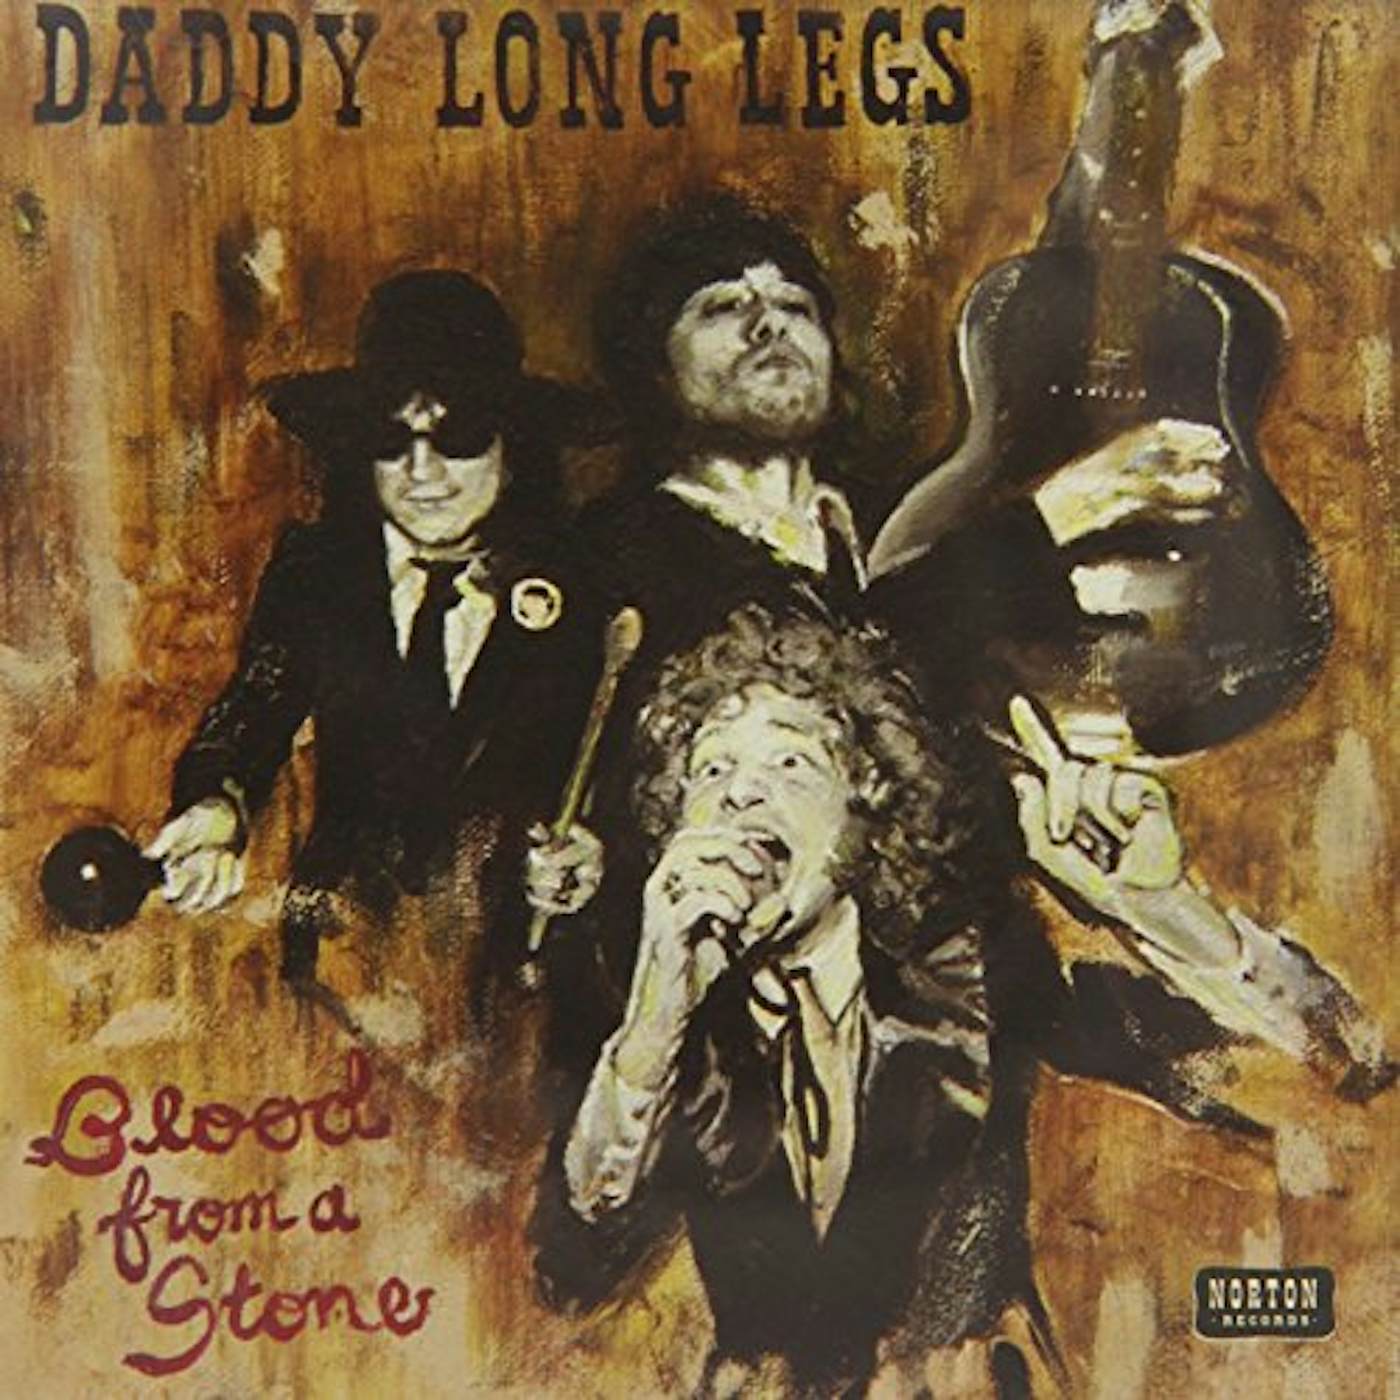 DADDY LONG LEGS BLOOD FROM A STONE CD